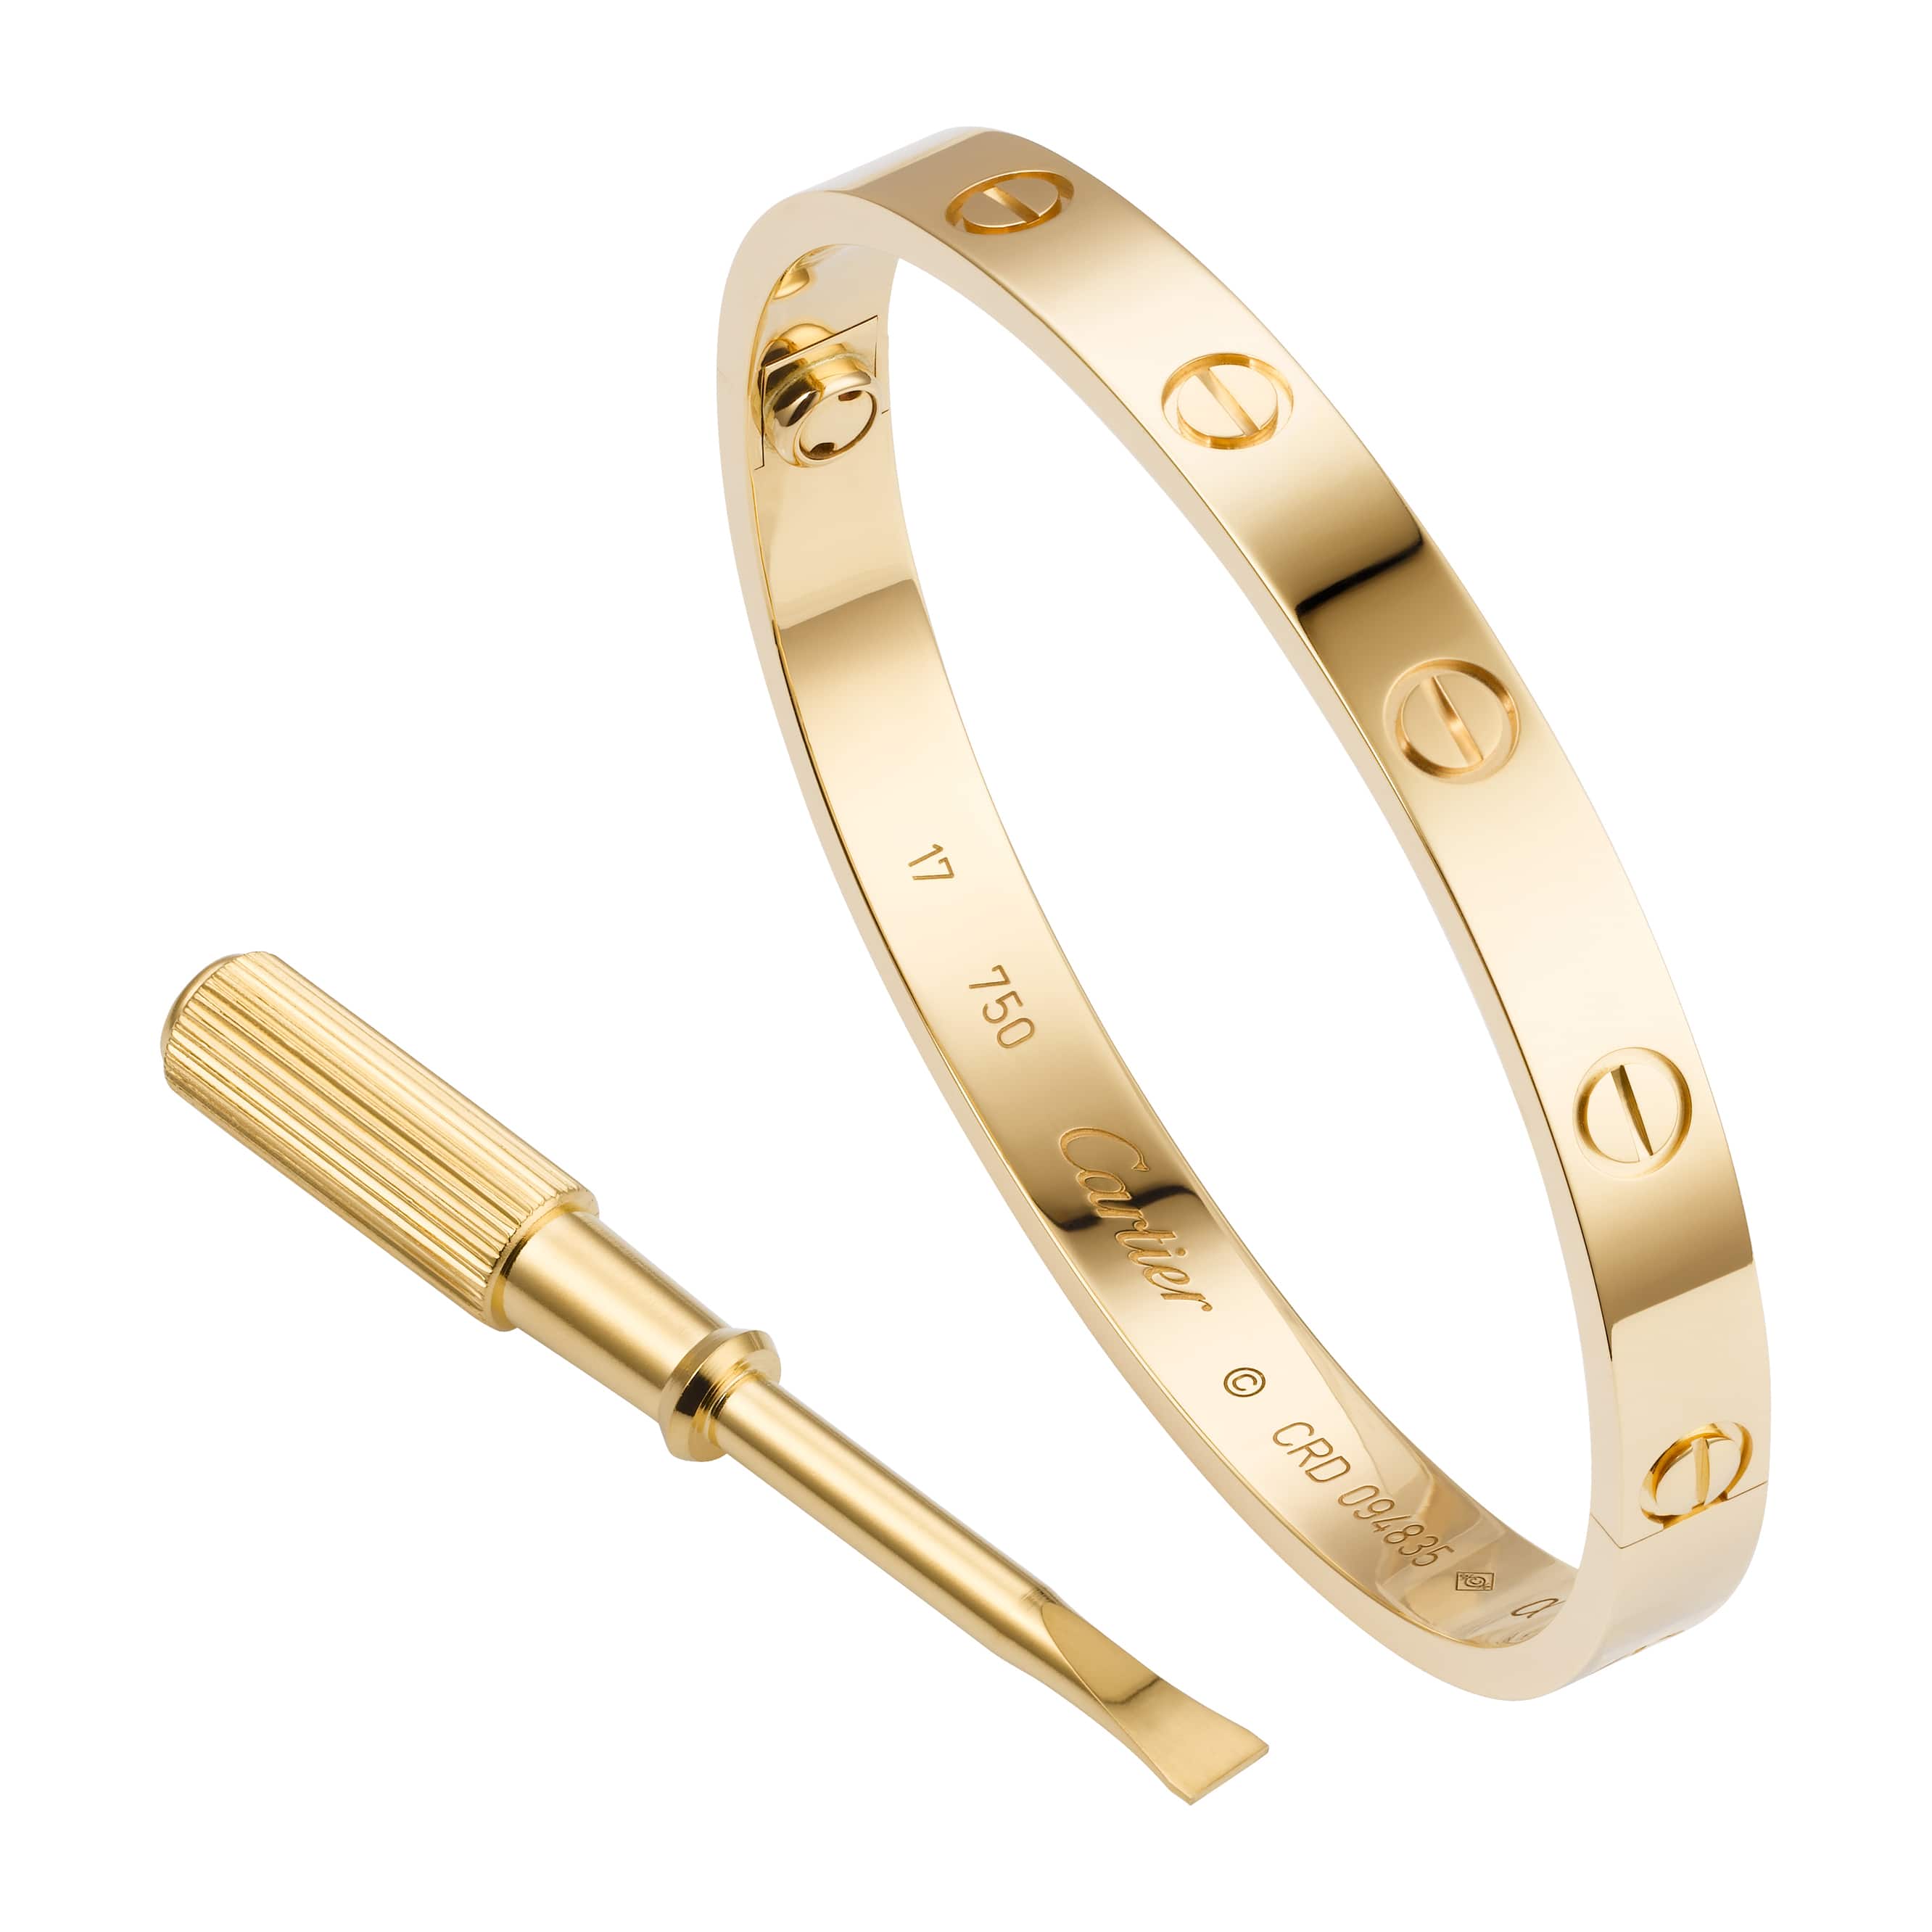 Cartier-love-bangle-gold-iconic-cult-jewellery | Solitaire Magazine